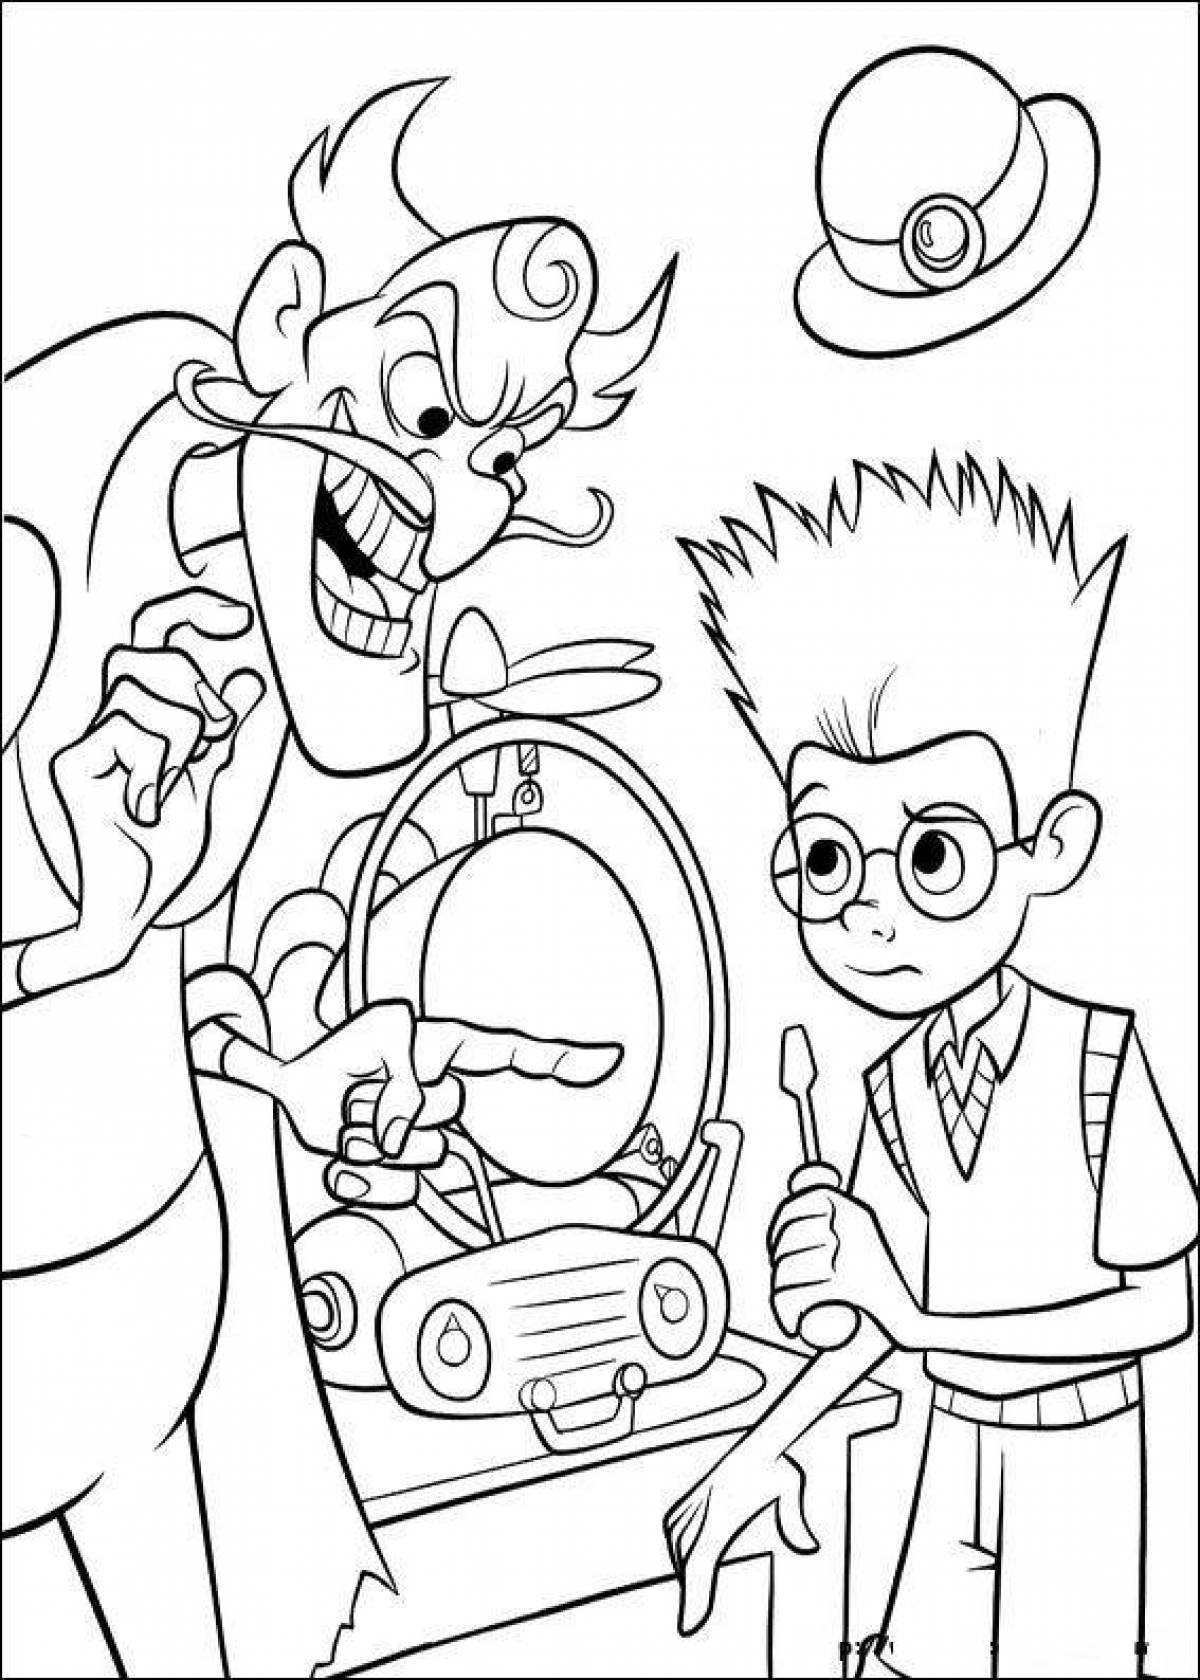 A fascinating coloring book from the 2014 animated series